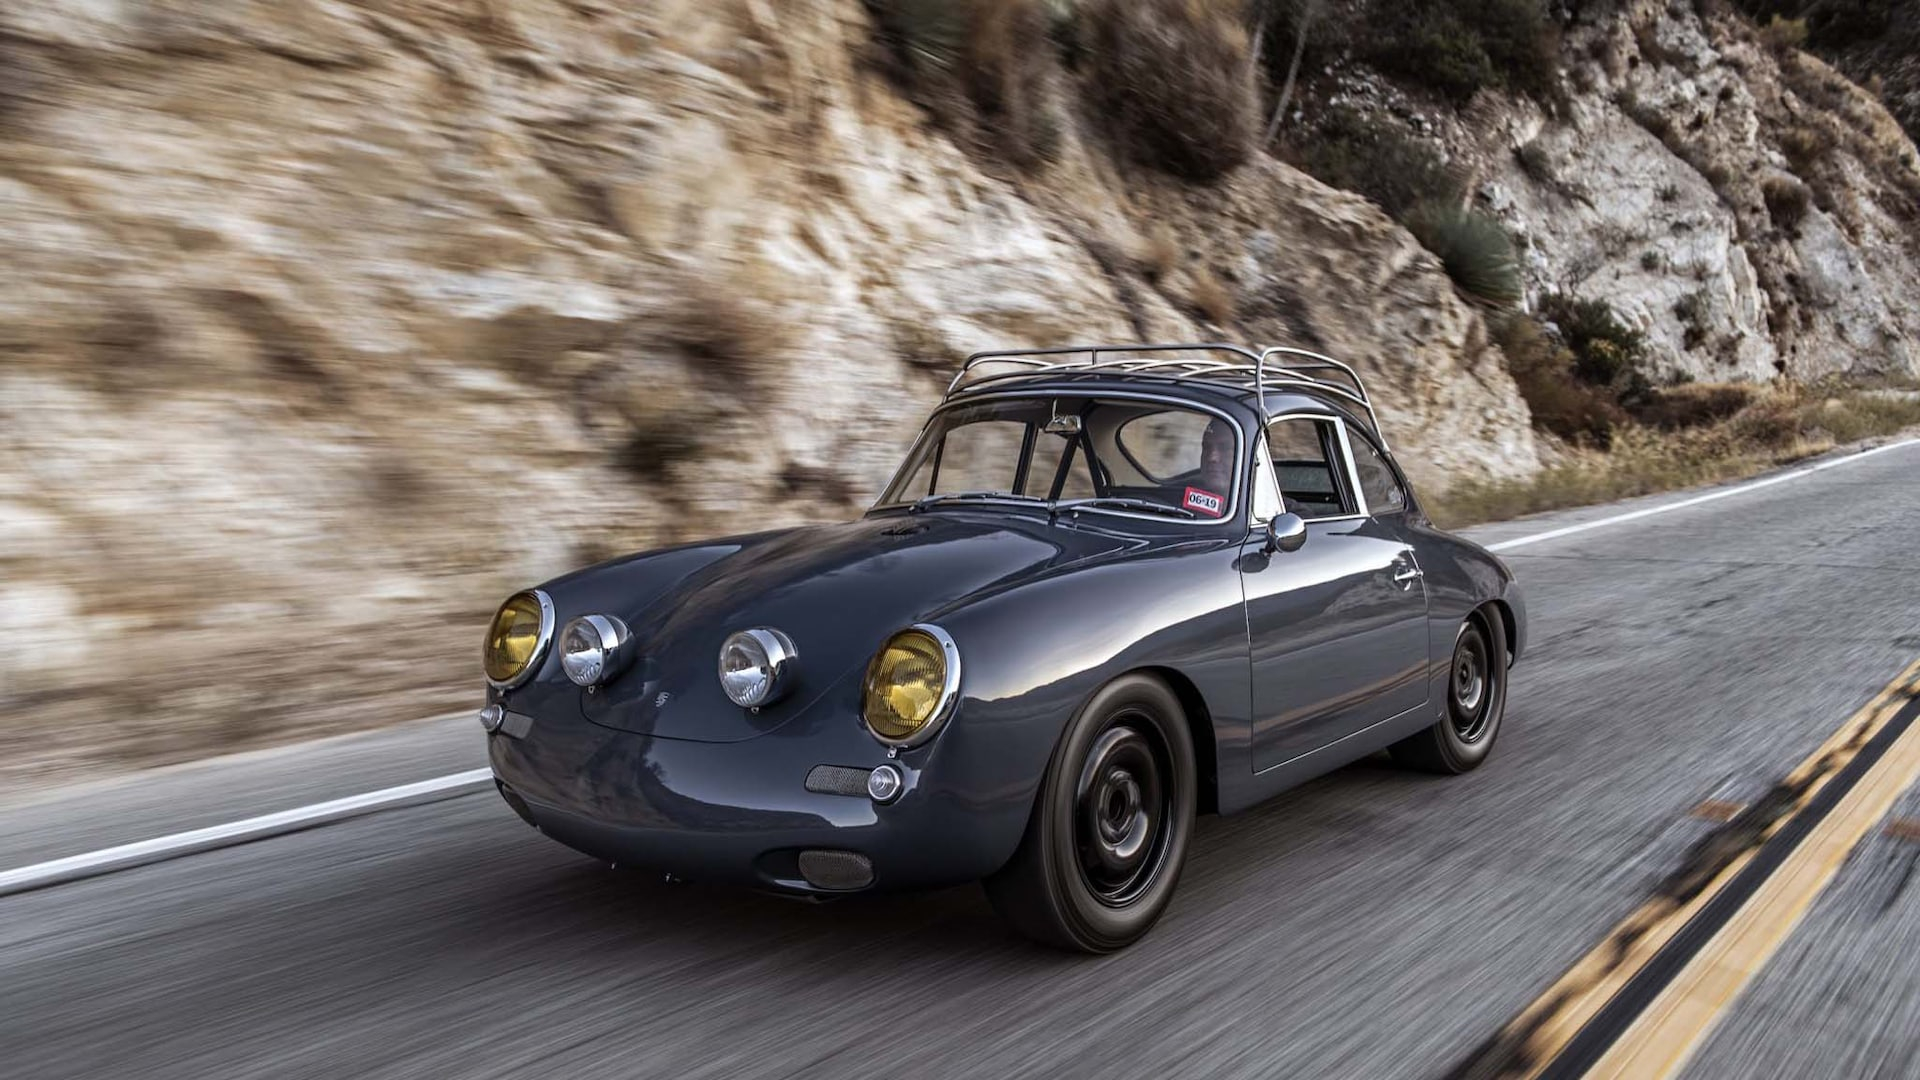 1920x1080 It Doesn't Get Cooler than This One-Off AWD Porsche 356 C4S